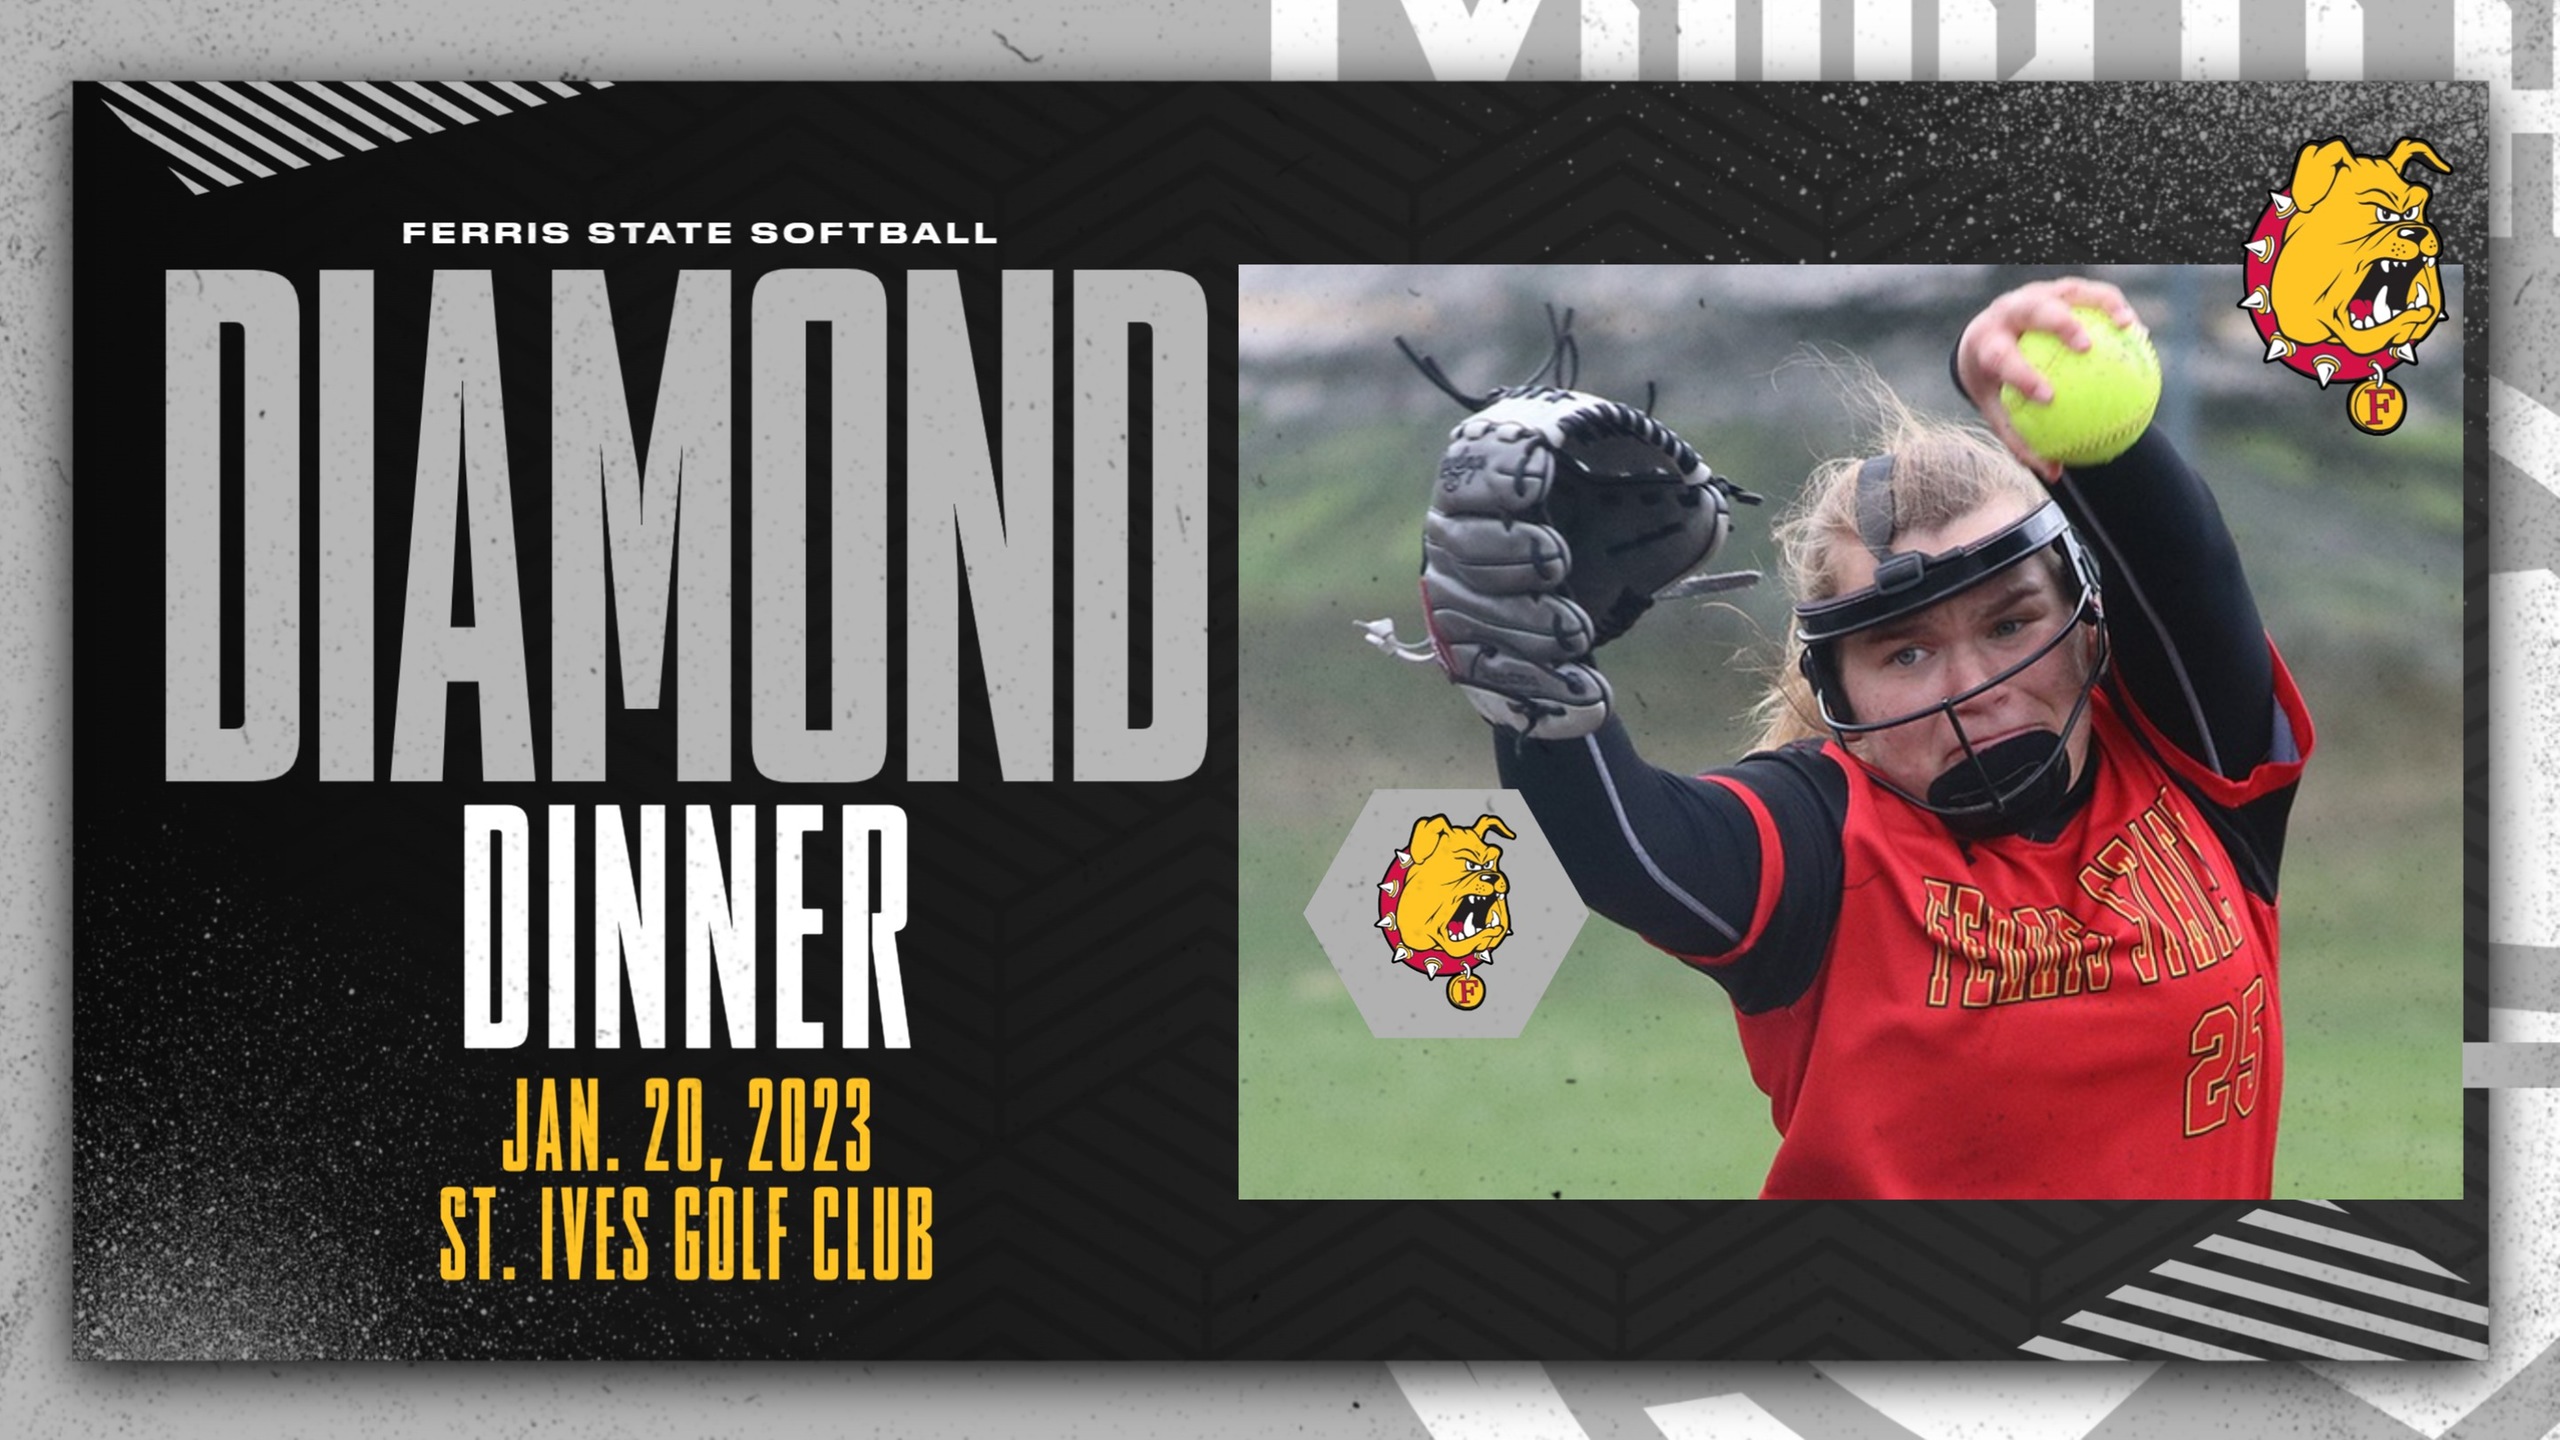 Ferris State Softball To Hold First-Ever Diamond Dinner On Jan. 20